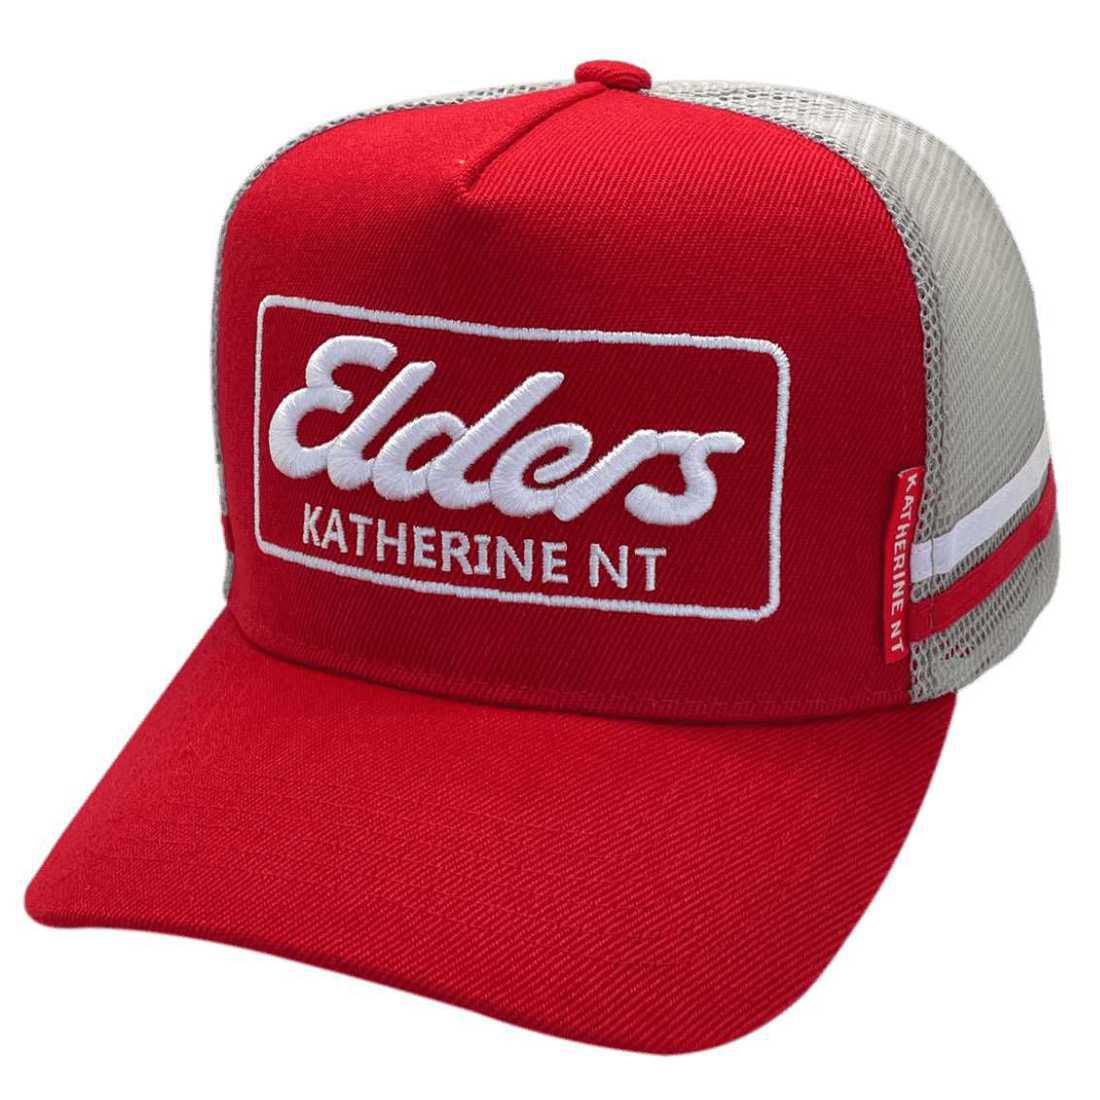 Elders Real Estate Katherine NT HP Original Basic Aussie Trucker Hat with double side bands 3d embroidery effect